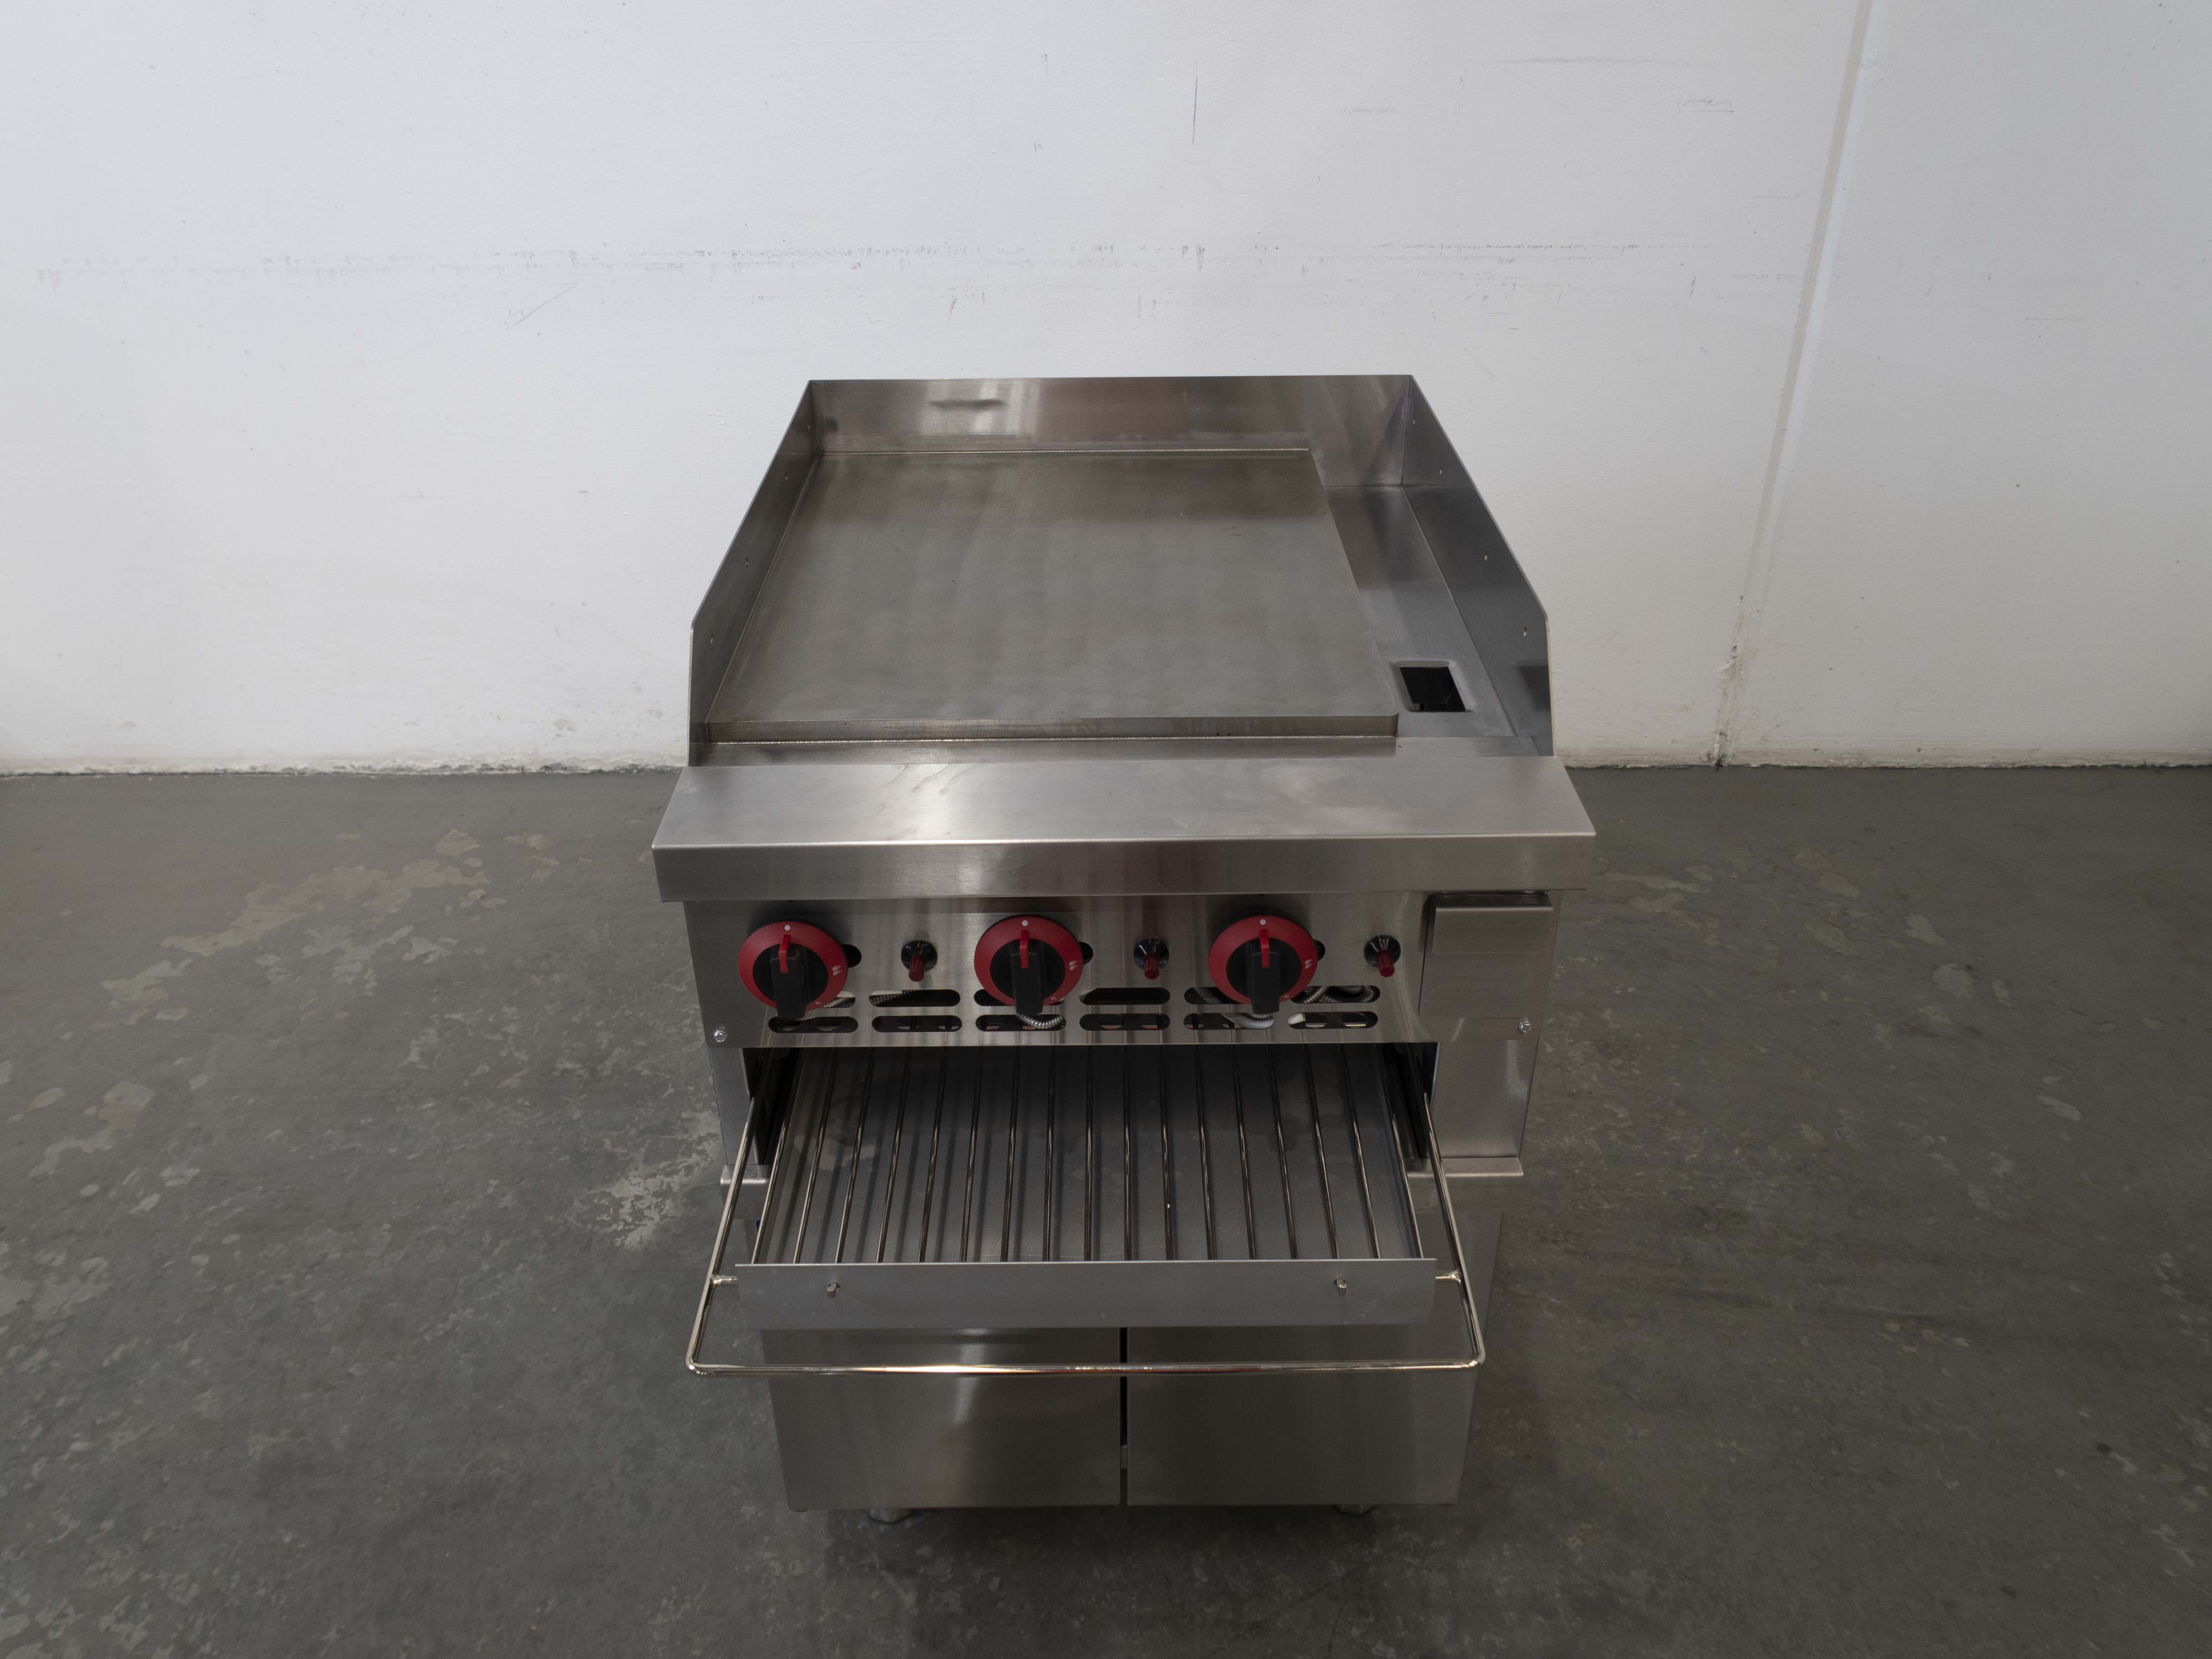 Thumbnail - Gasmax GGS-24 Griddle and Toaster with Cabinet